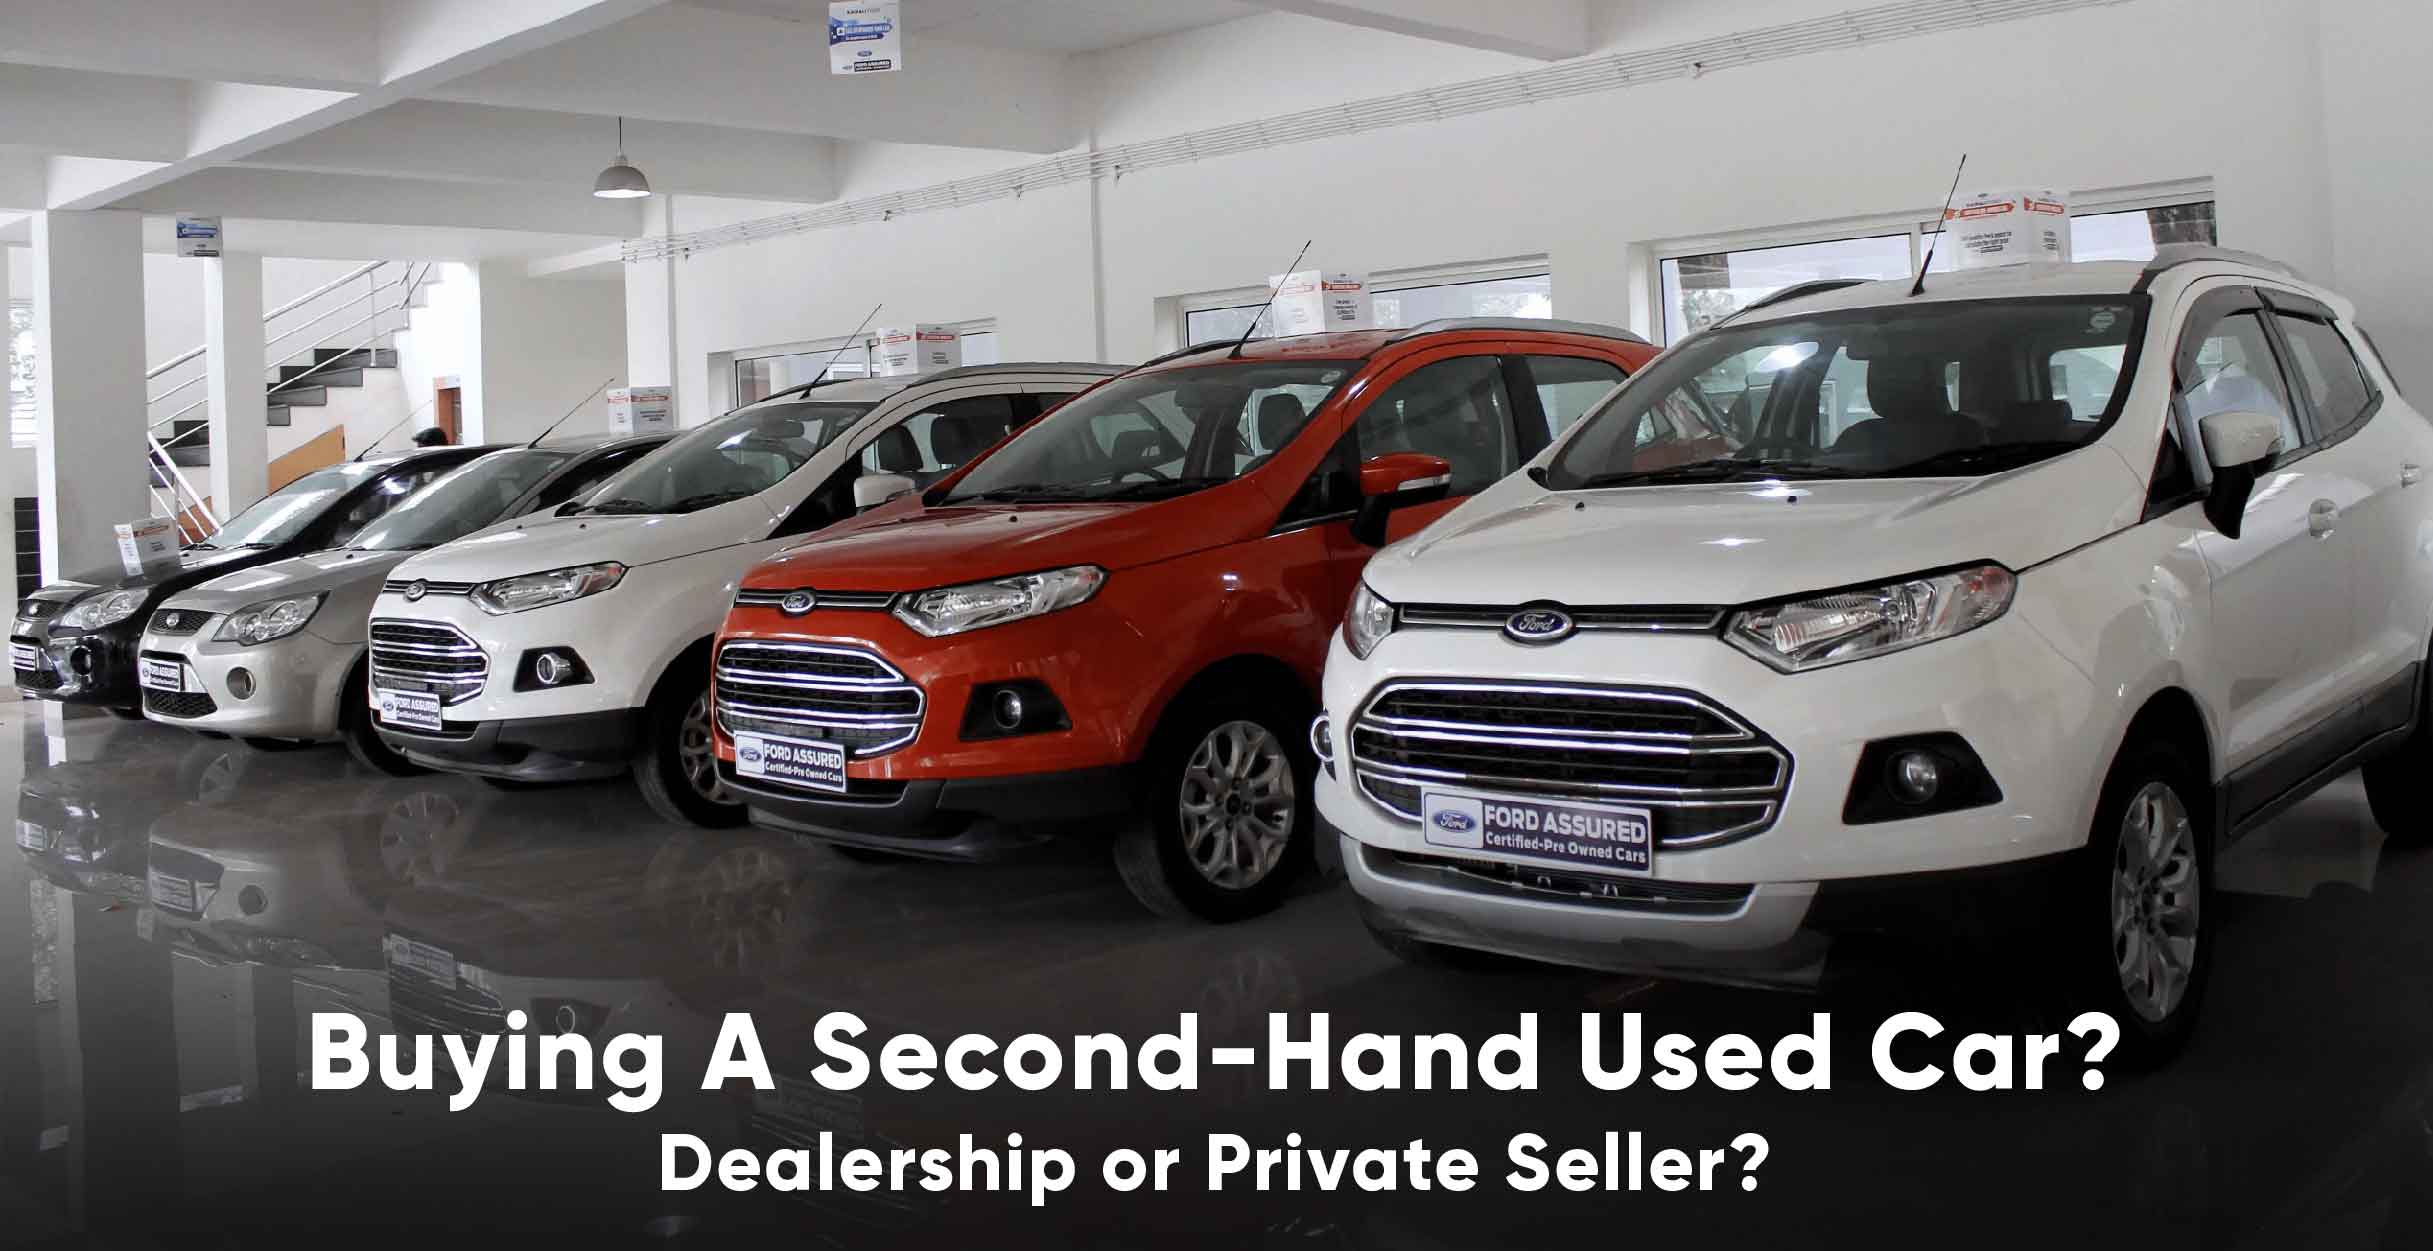 Buying a Second Hand Used Car?